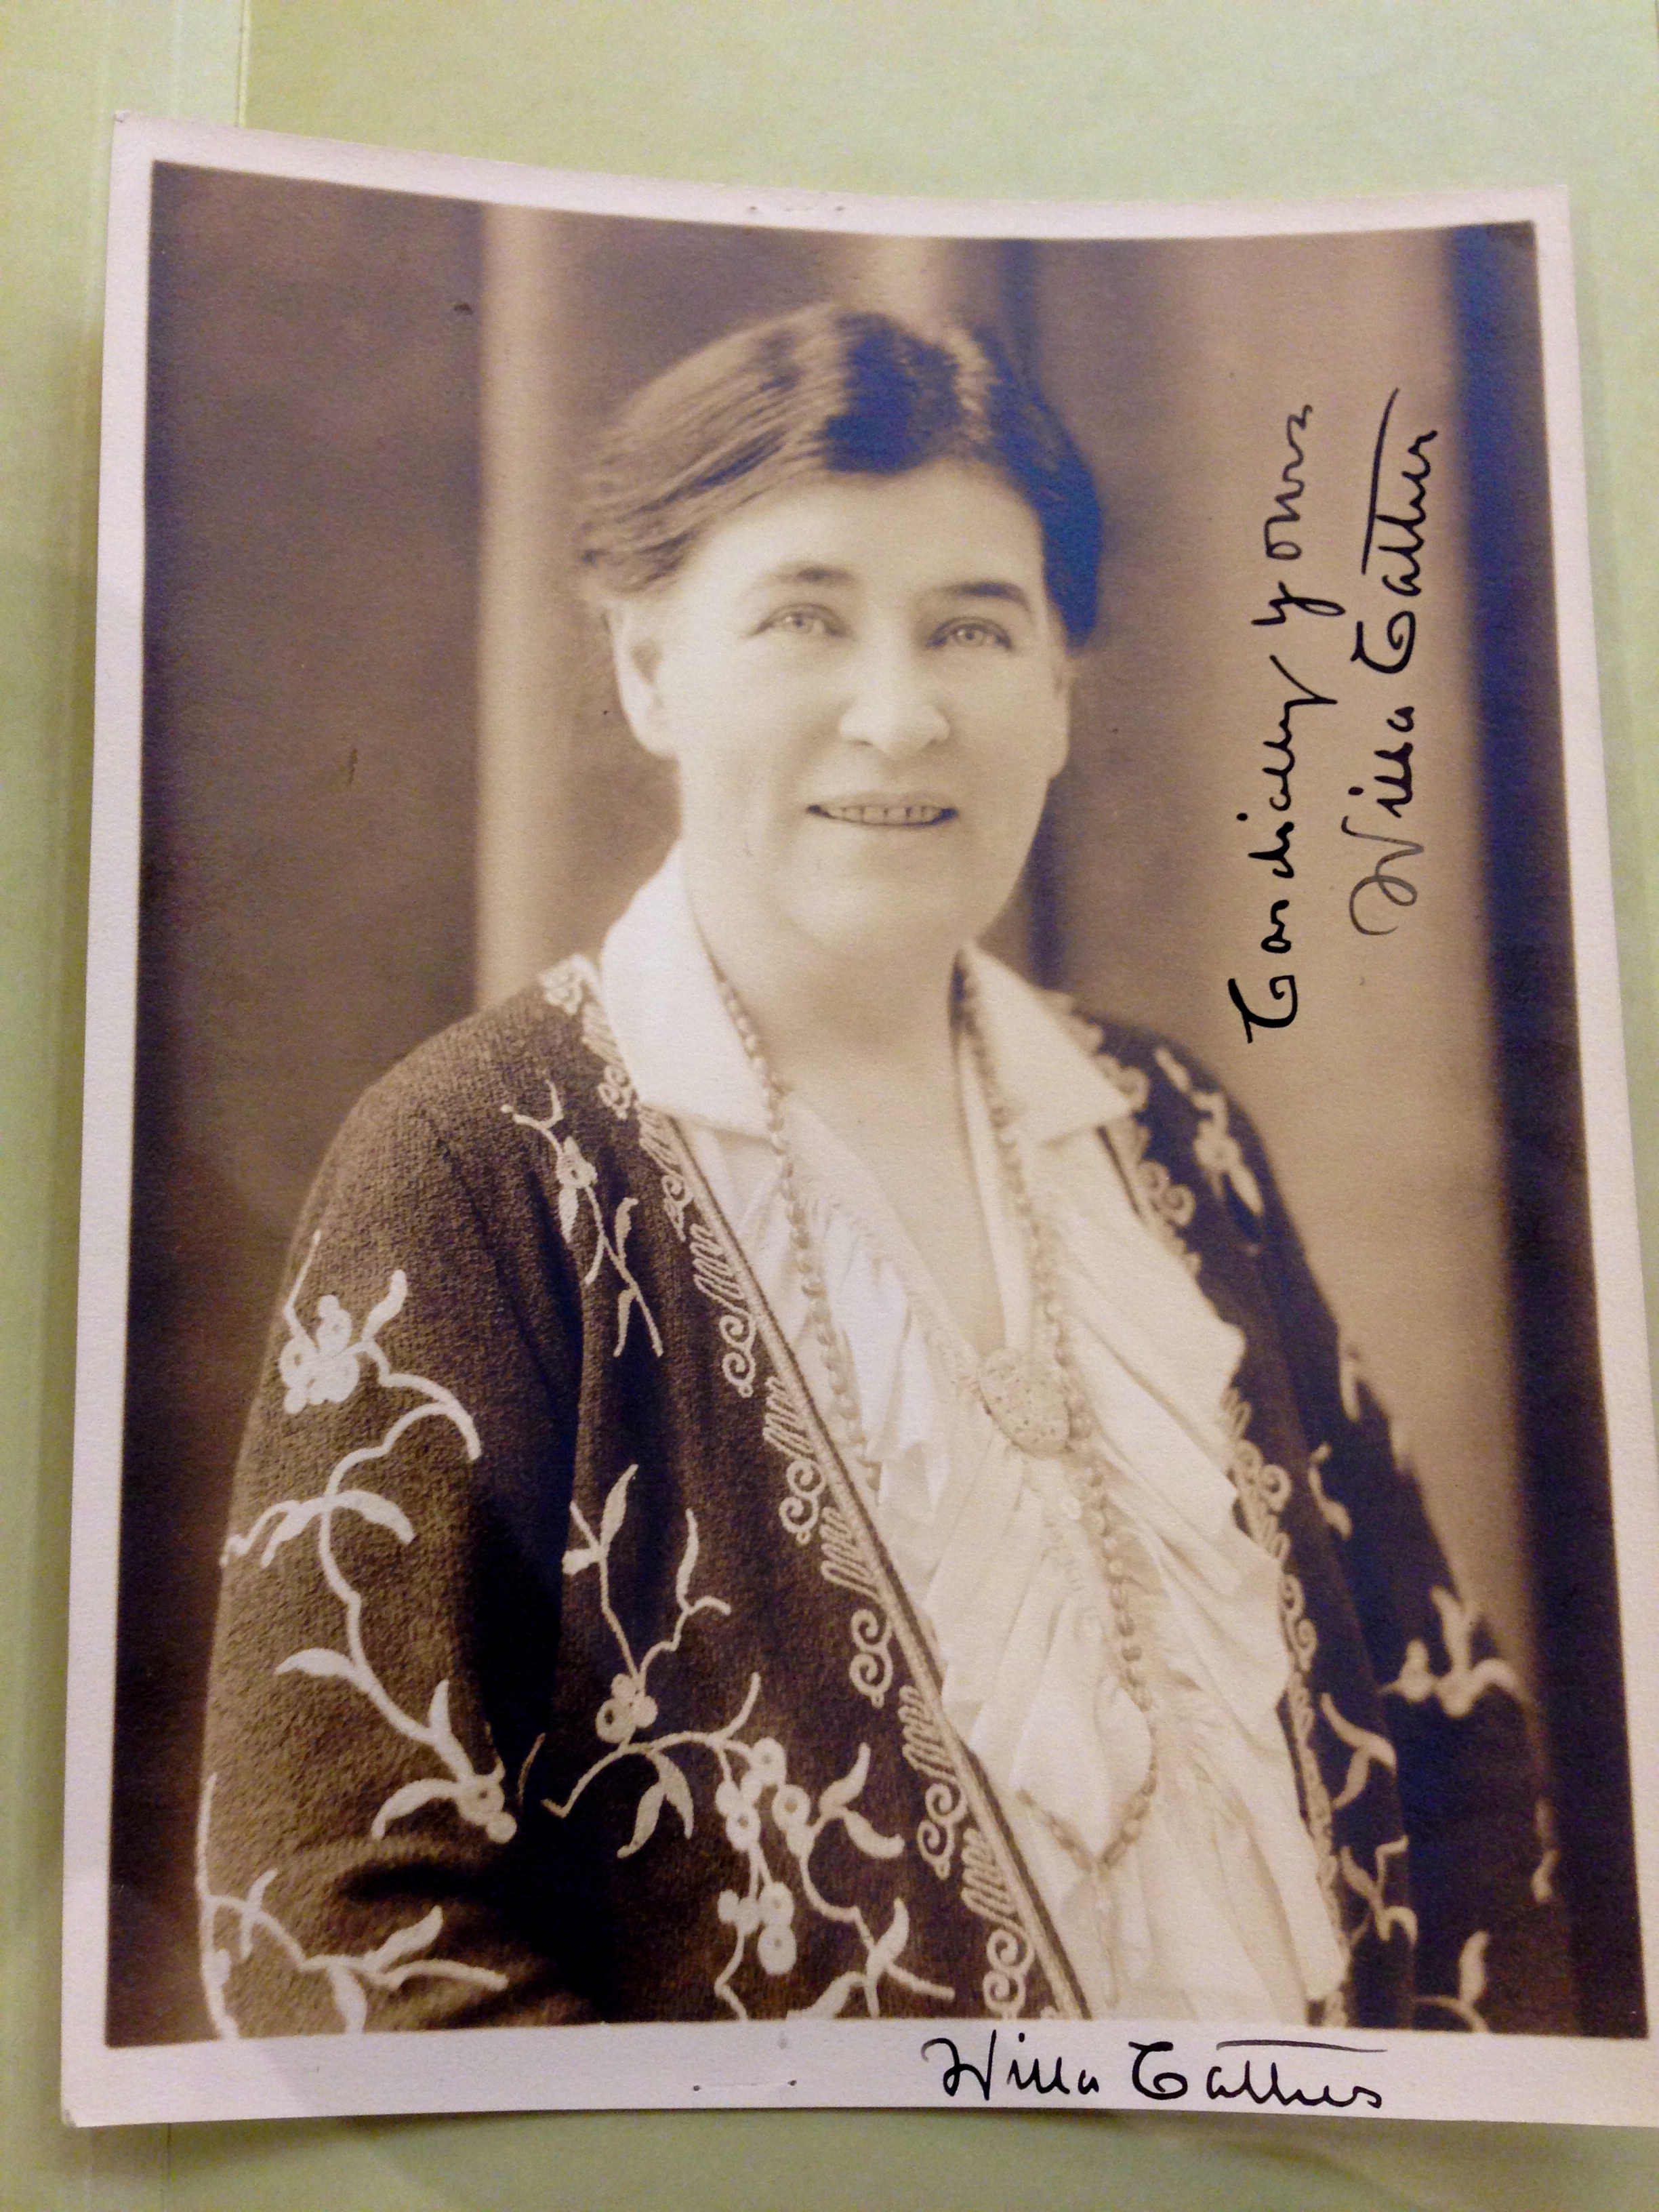 Double-signed photograph of Willa Cather, n.d. (Photograph by Emily Caldwell)